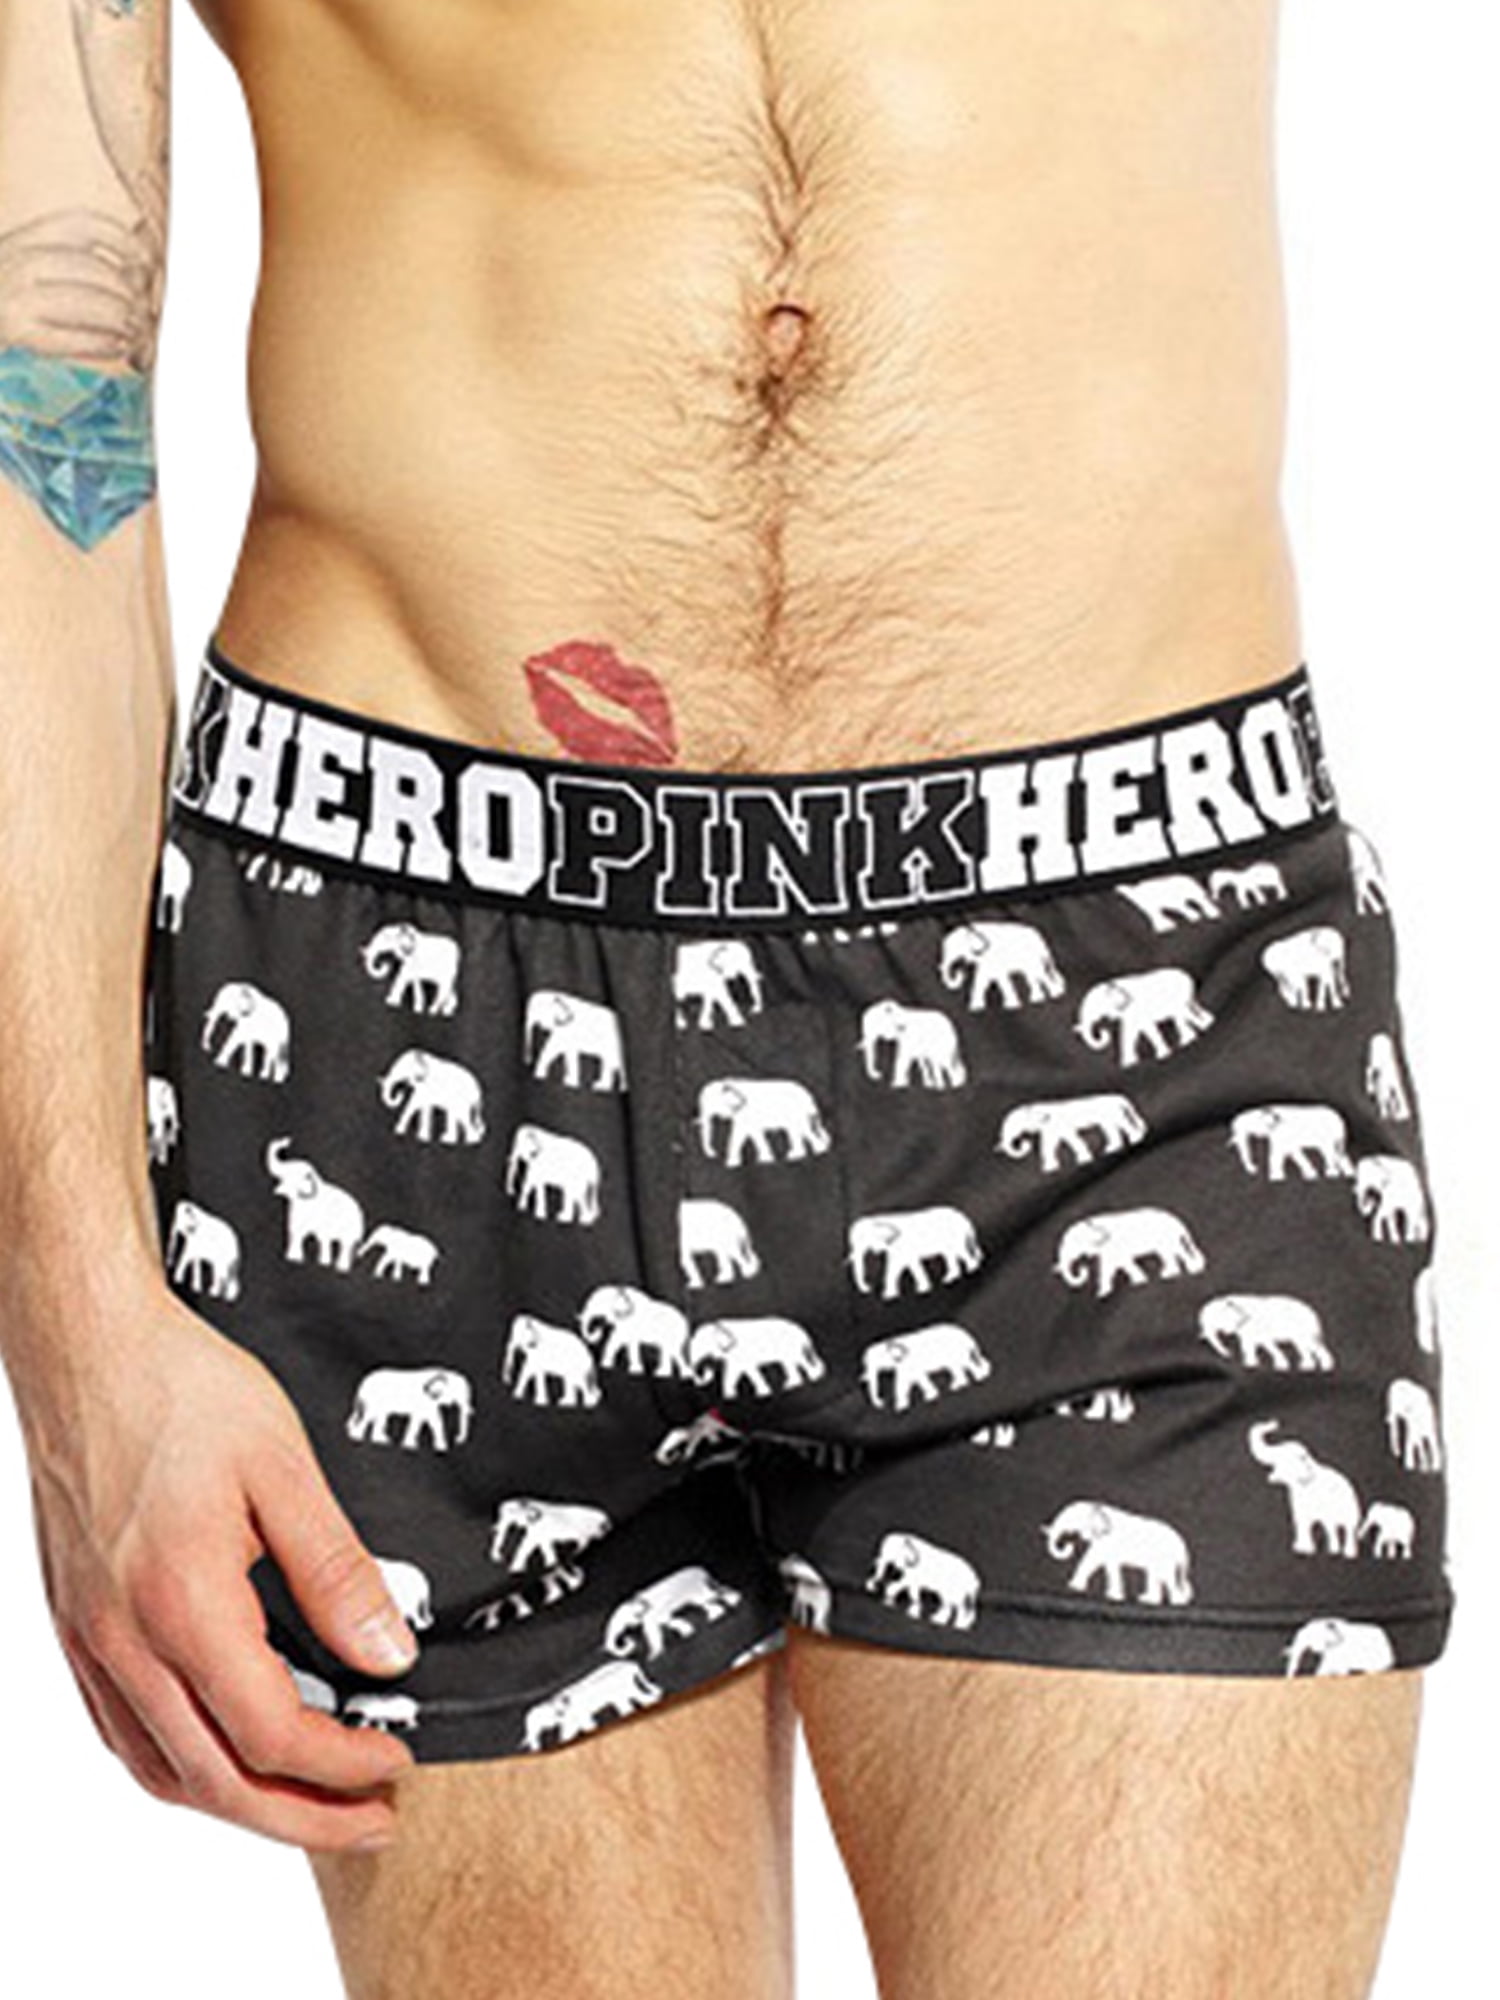 The Eyes of Elephant Boxer Briefs for Men Mens Comfortable Underwear